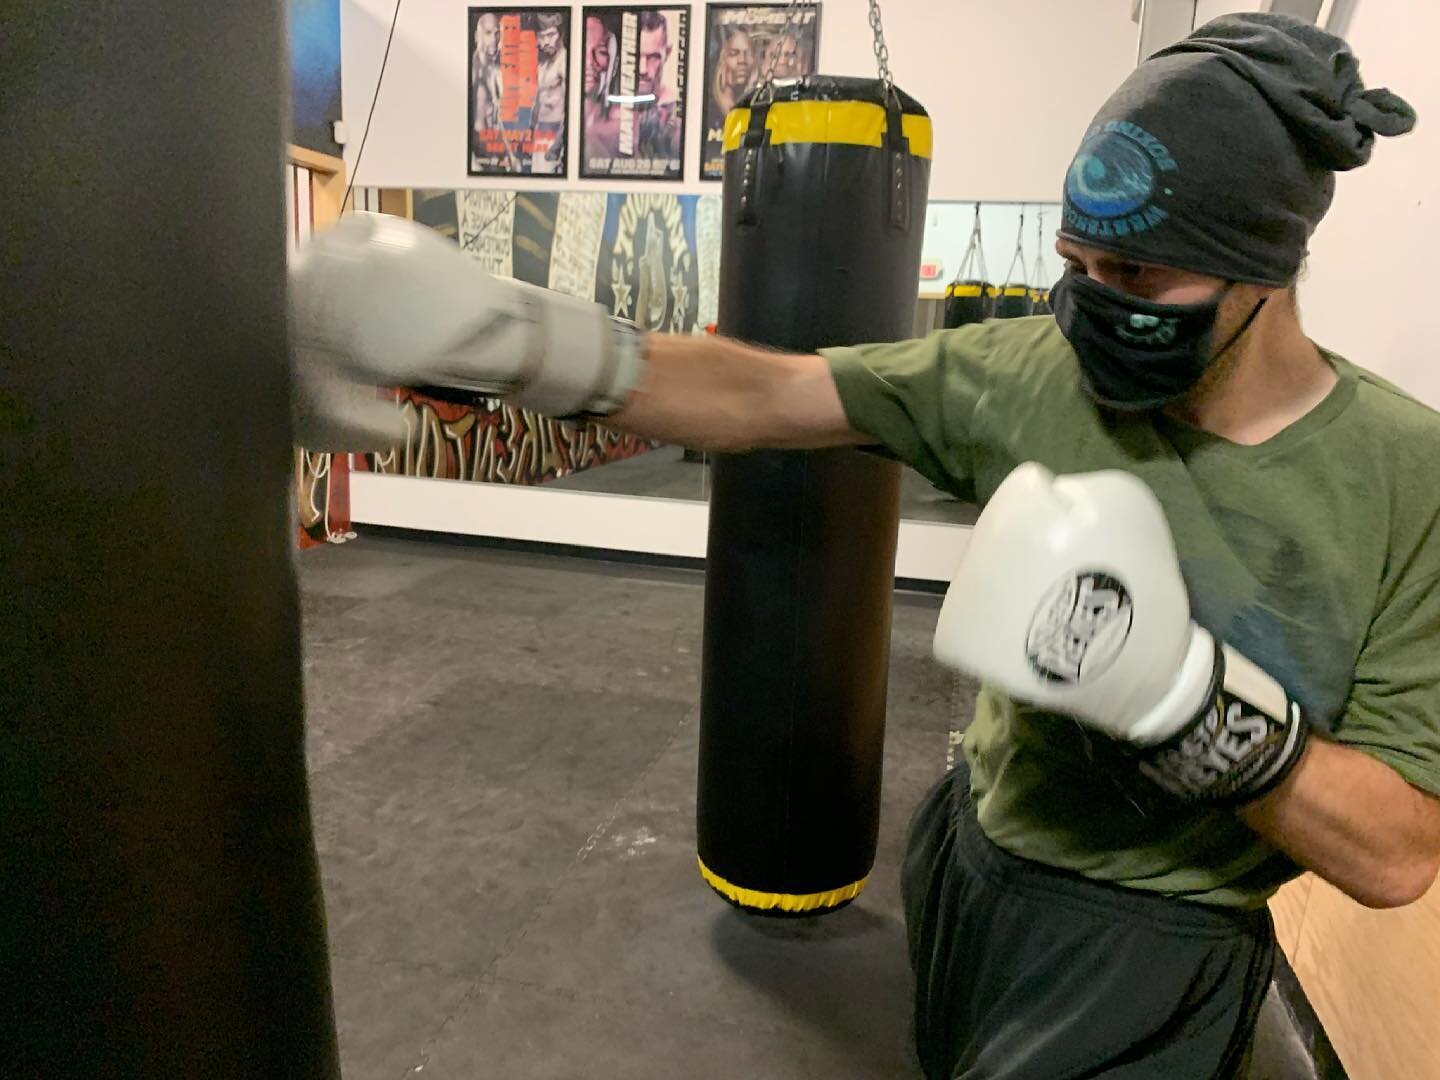 Happy hump day guys! Just a couple more days to smash through before the weekend. We got this! 🥊😎

#boxing #humpday #wednesday #weekend #boxingtraining #boxingworkout #bagwork #westshorebusiness #westshore #westshoreboxing #yyj #yyjbusiness